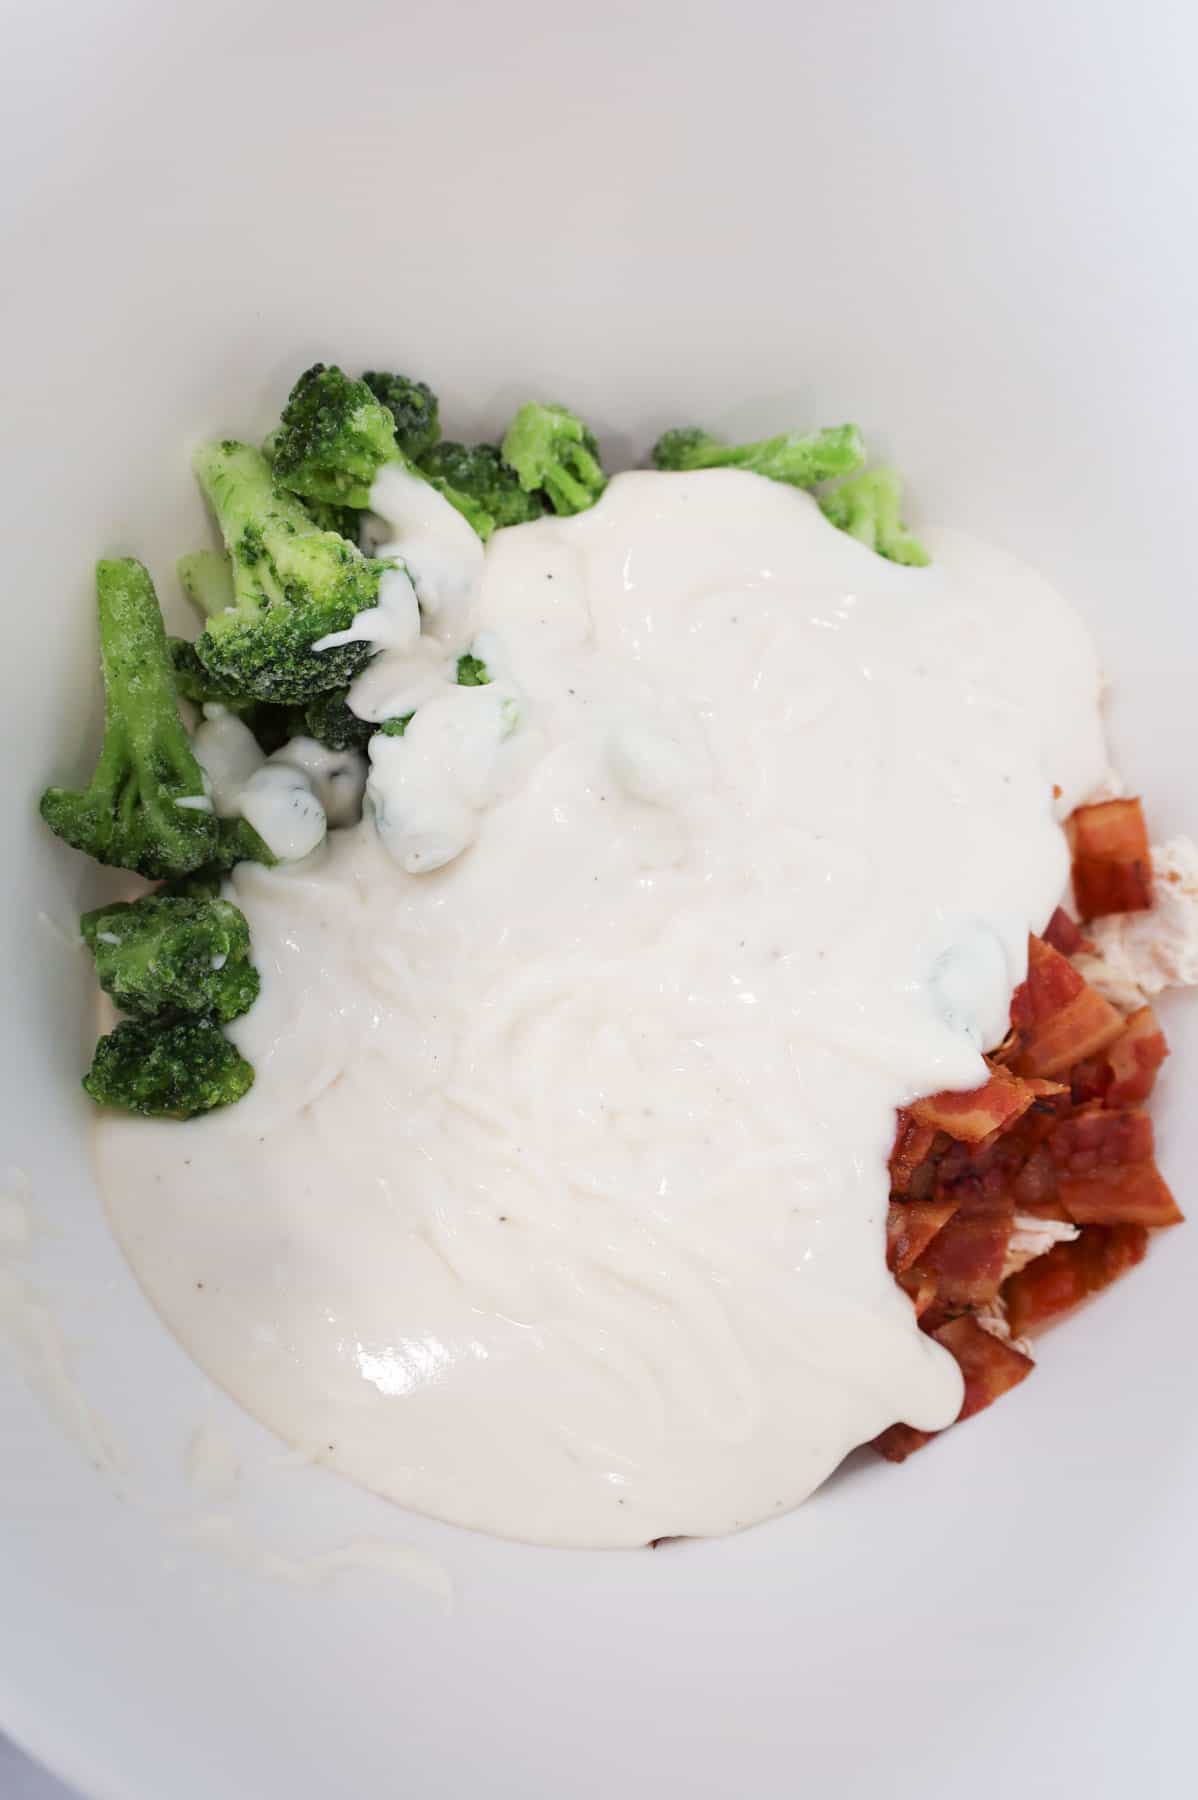 alfredo sauce poured over broccoli, chicken and bacon in a mixing bowl